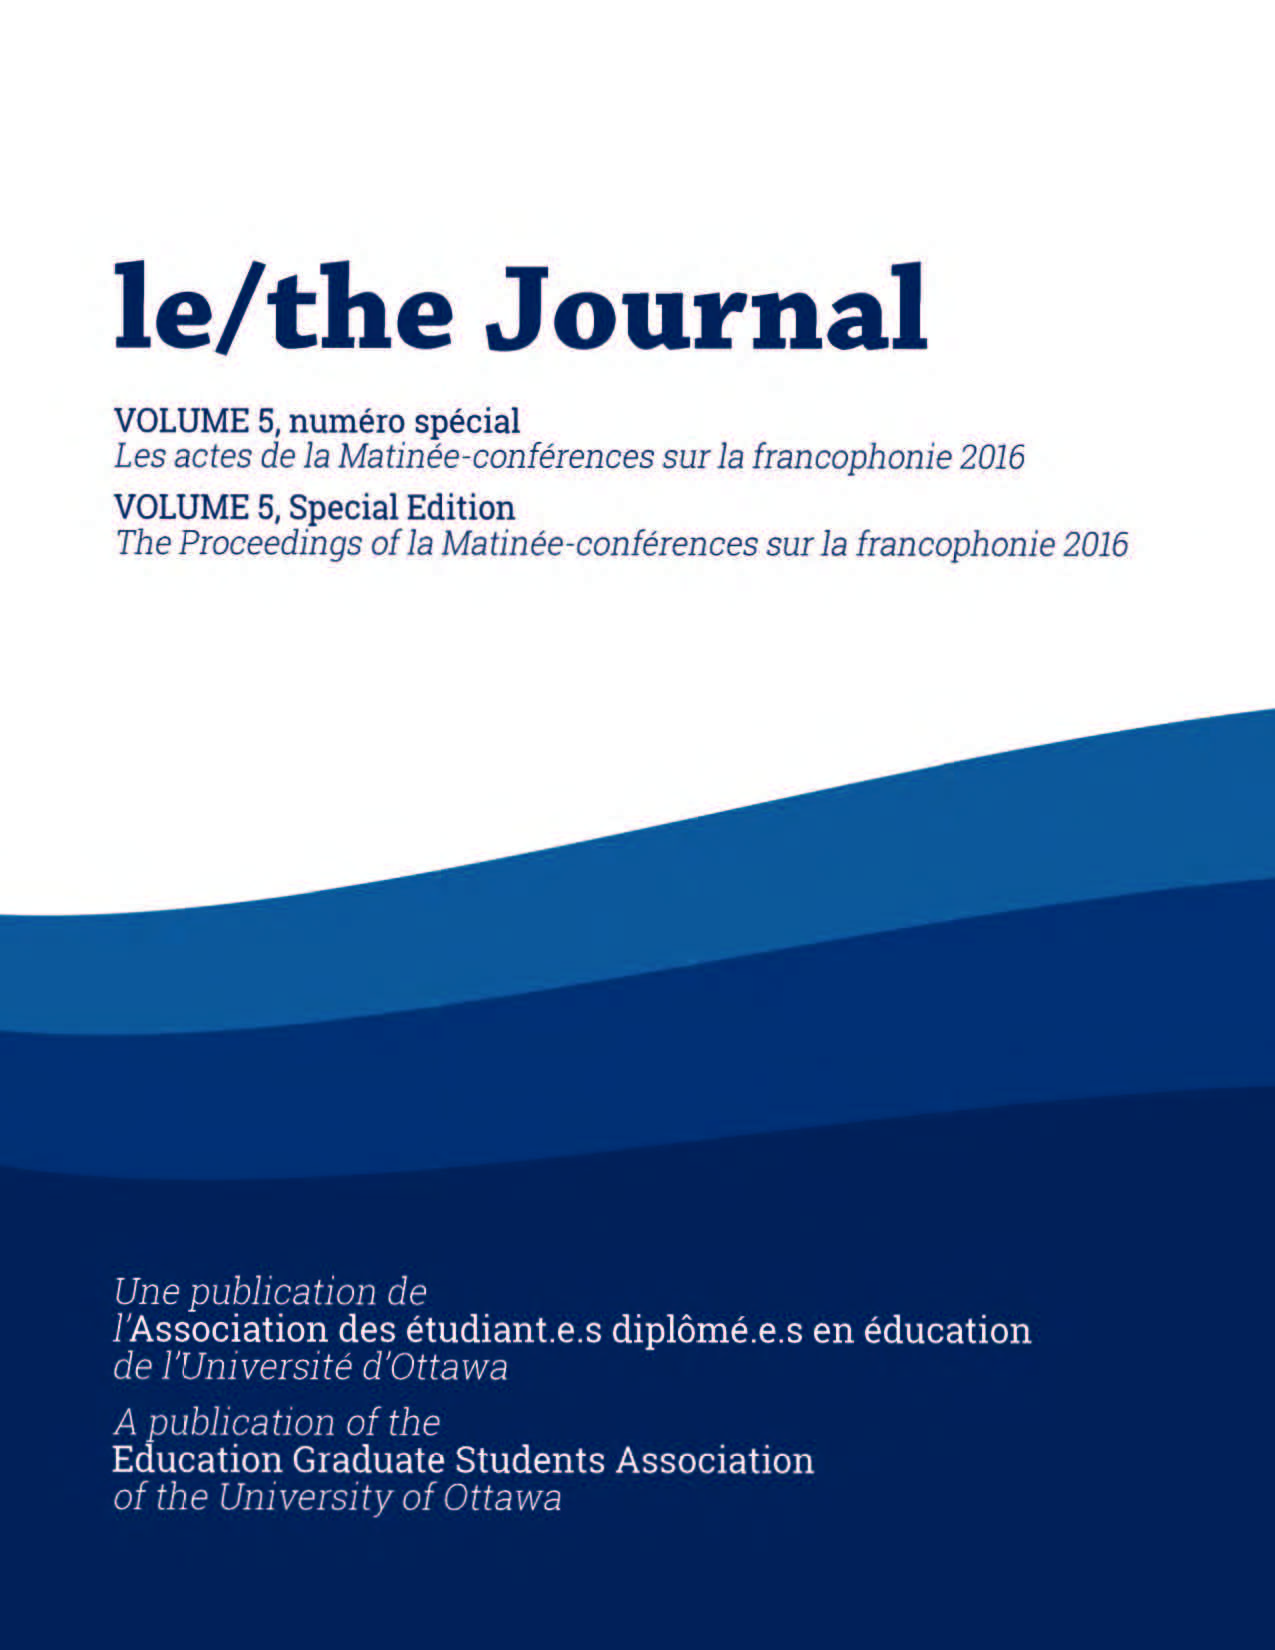 Journal_Cover_2015-10-14b_2